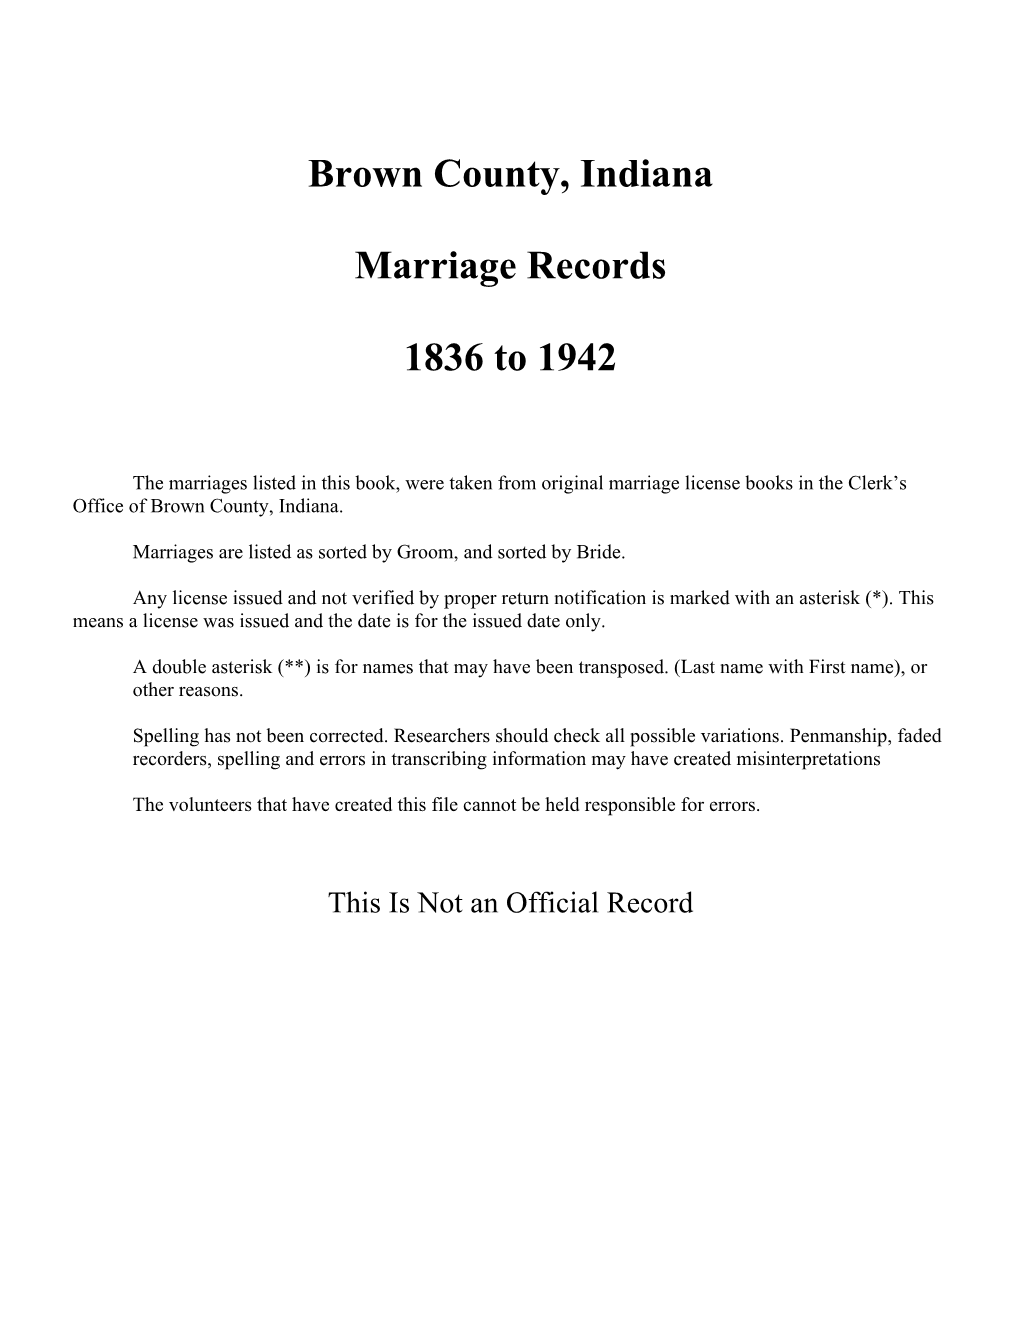 Brown County Marriages 1836